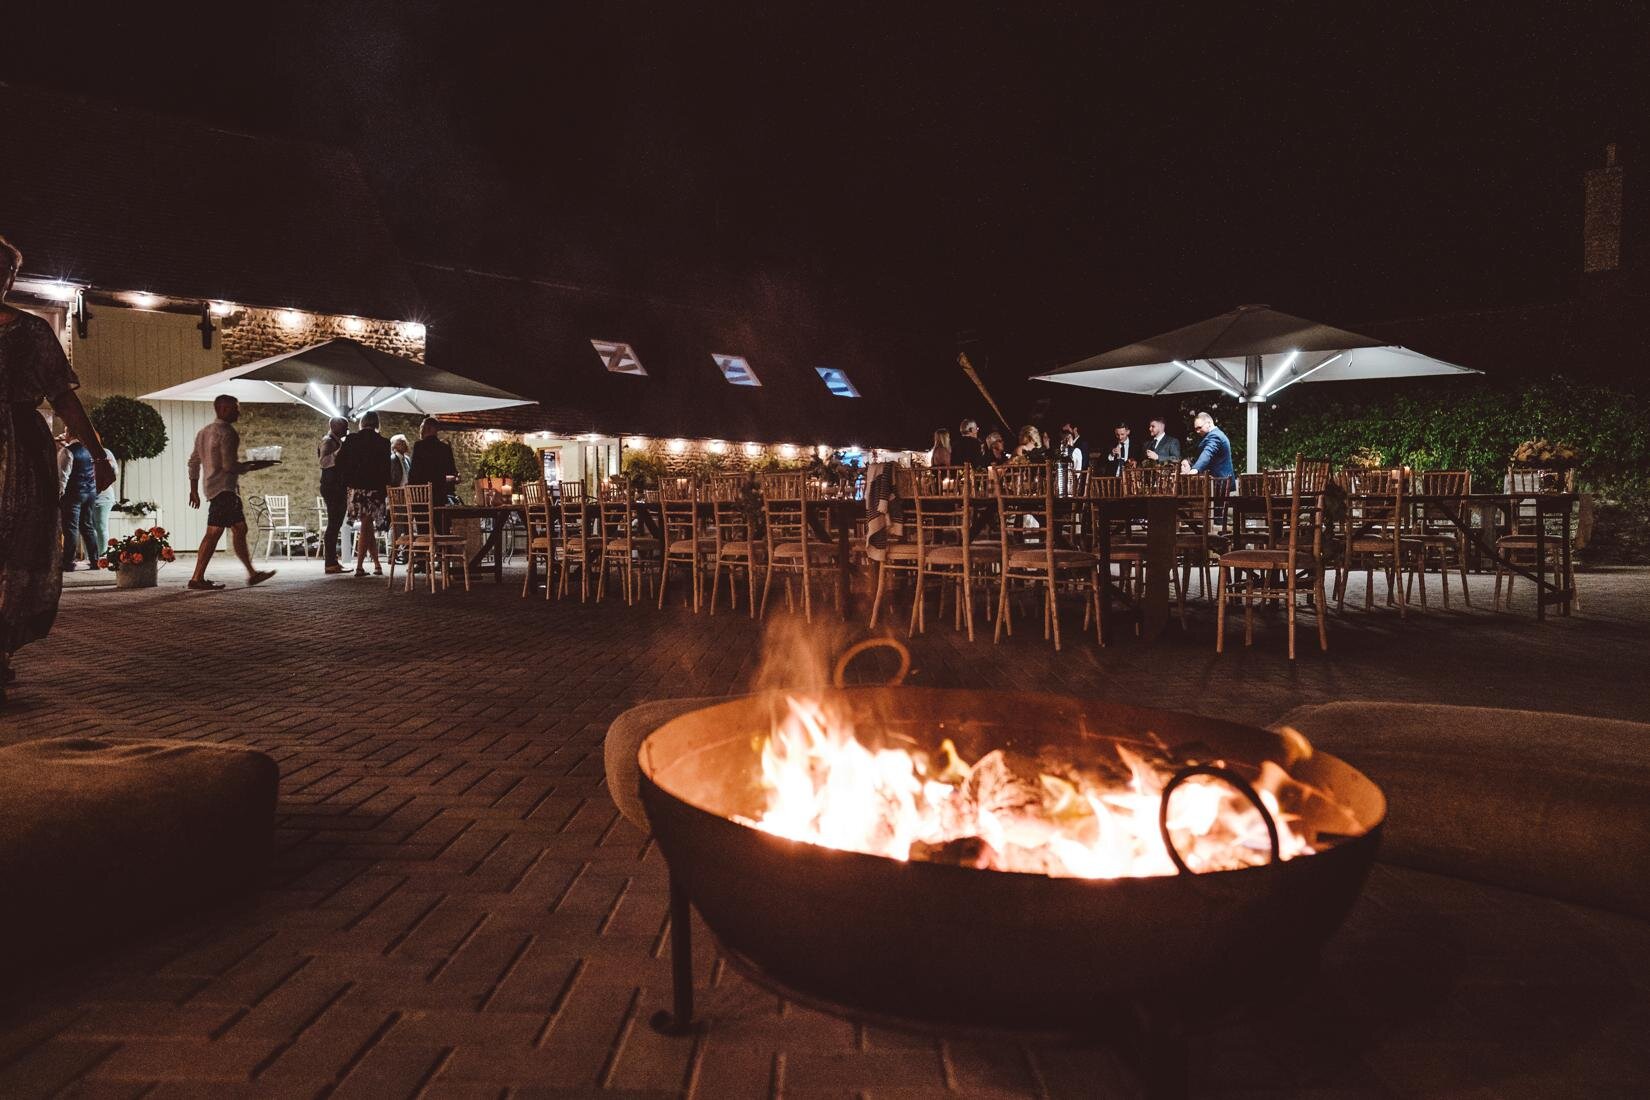 Top 20 Wedding Venues In Oxfordshire, Wedding Venues With Fire Pits